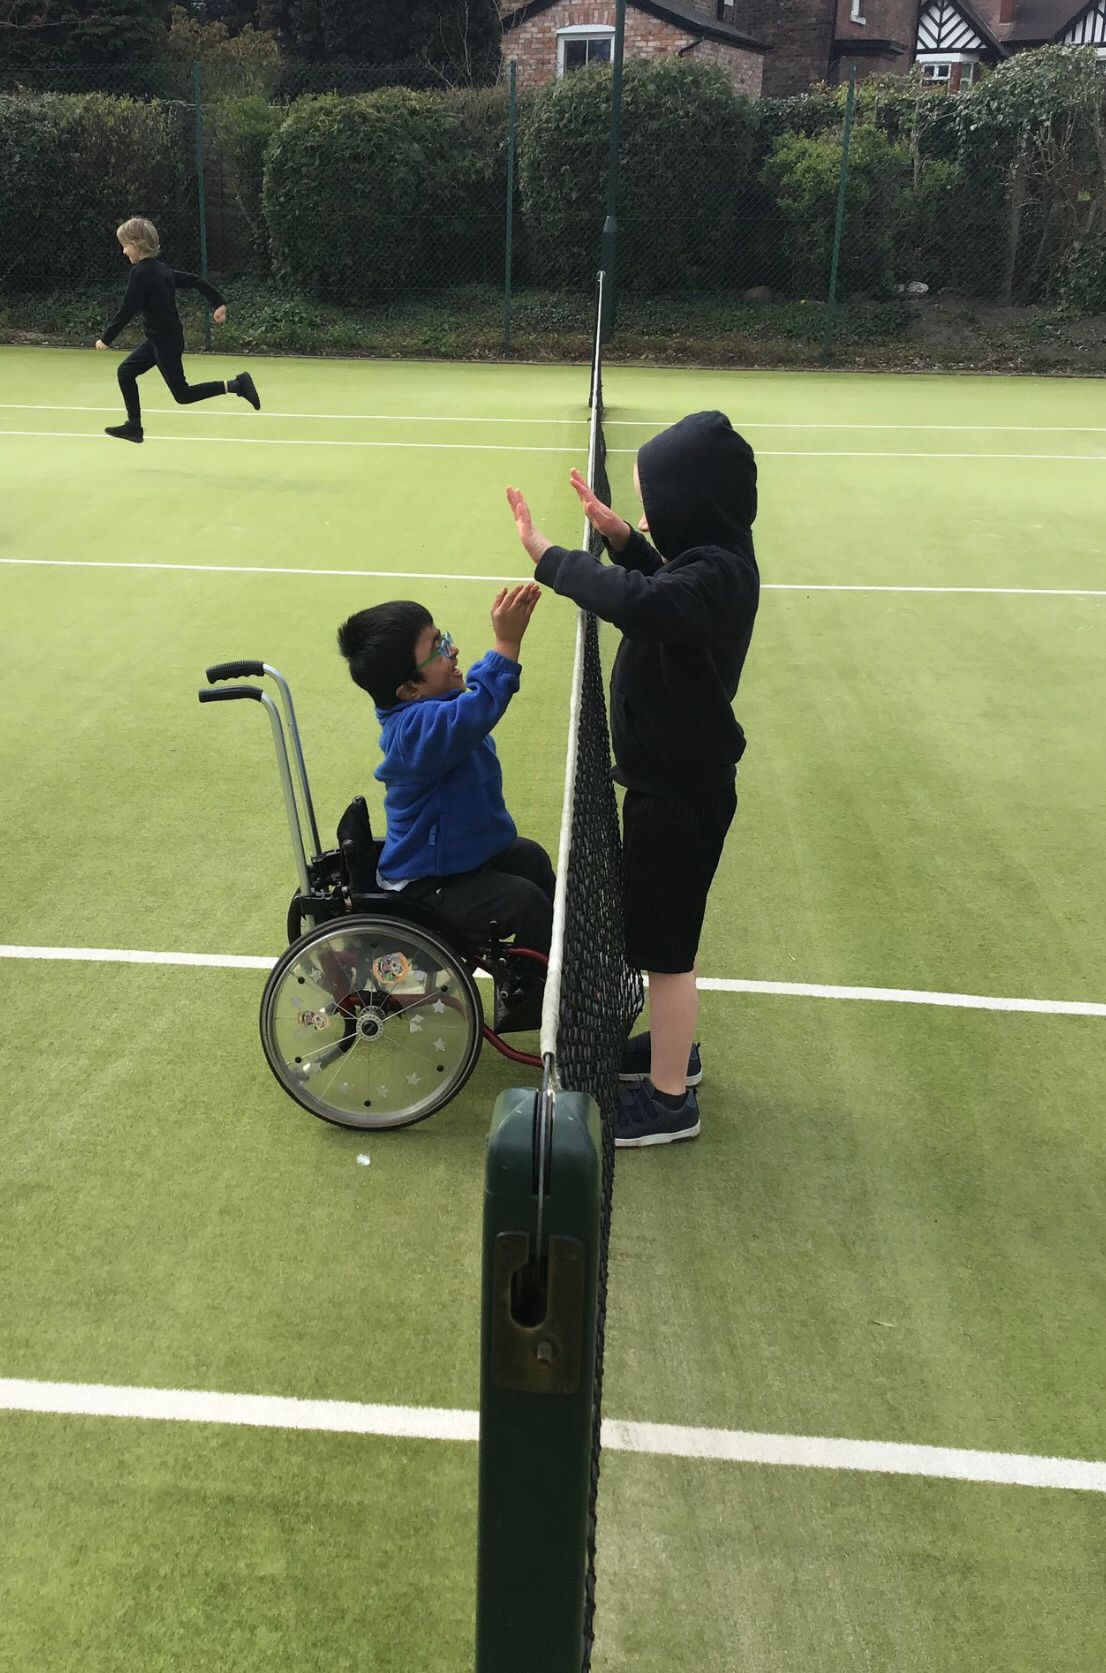 2 children at the net high fiving, one child is a wheelchair user